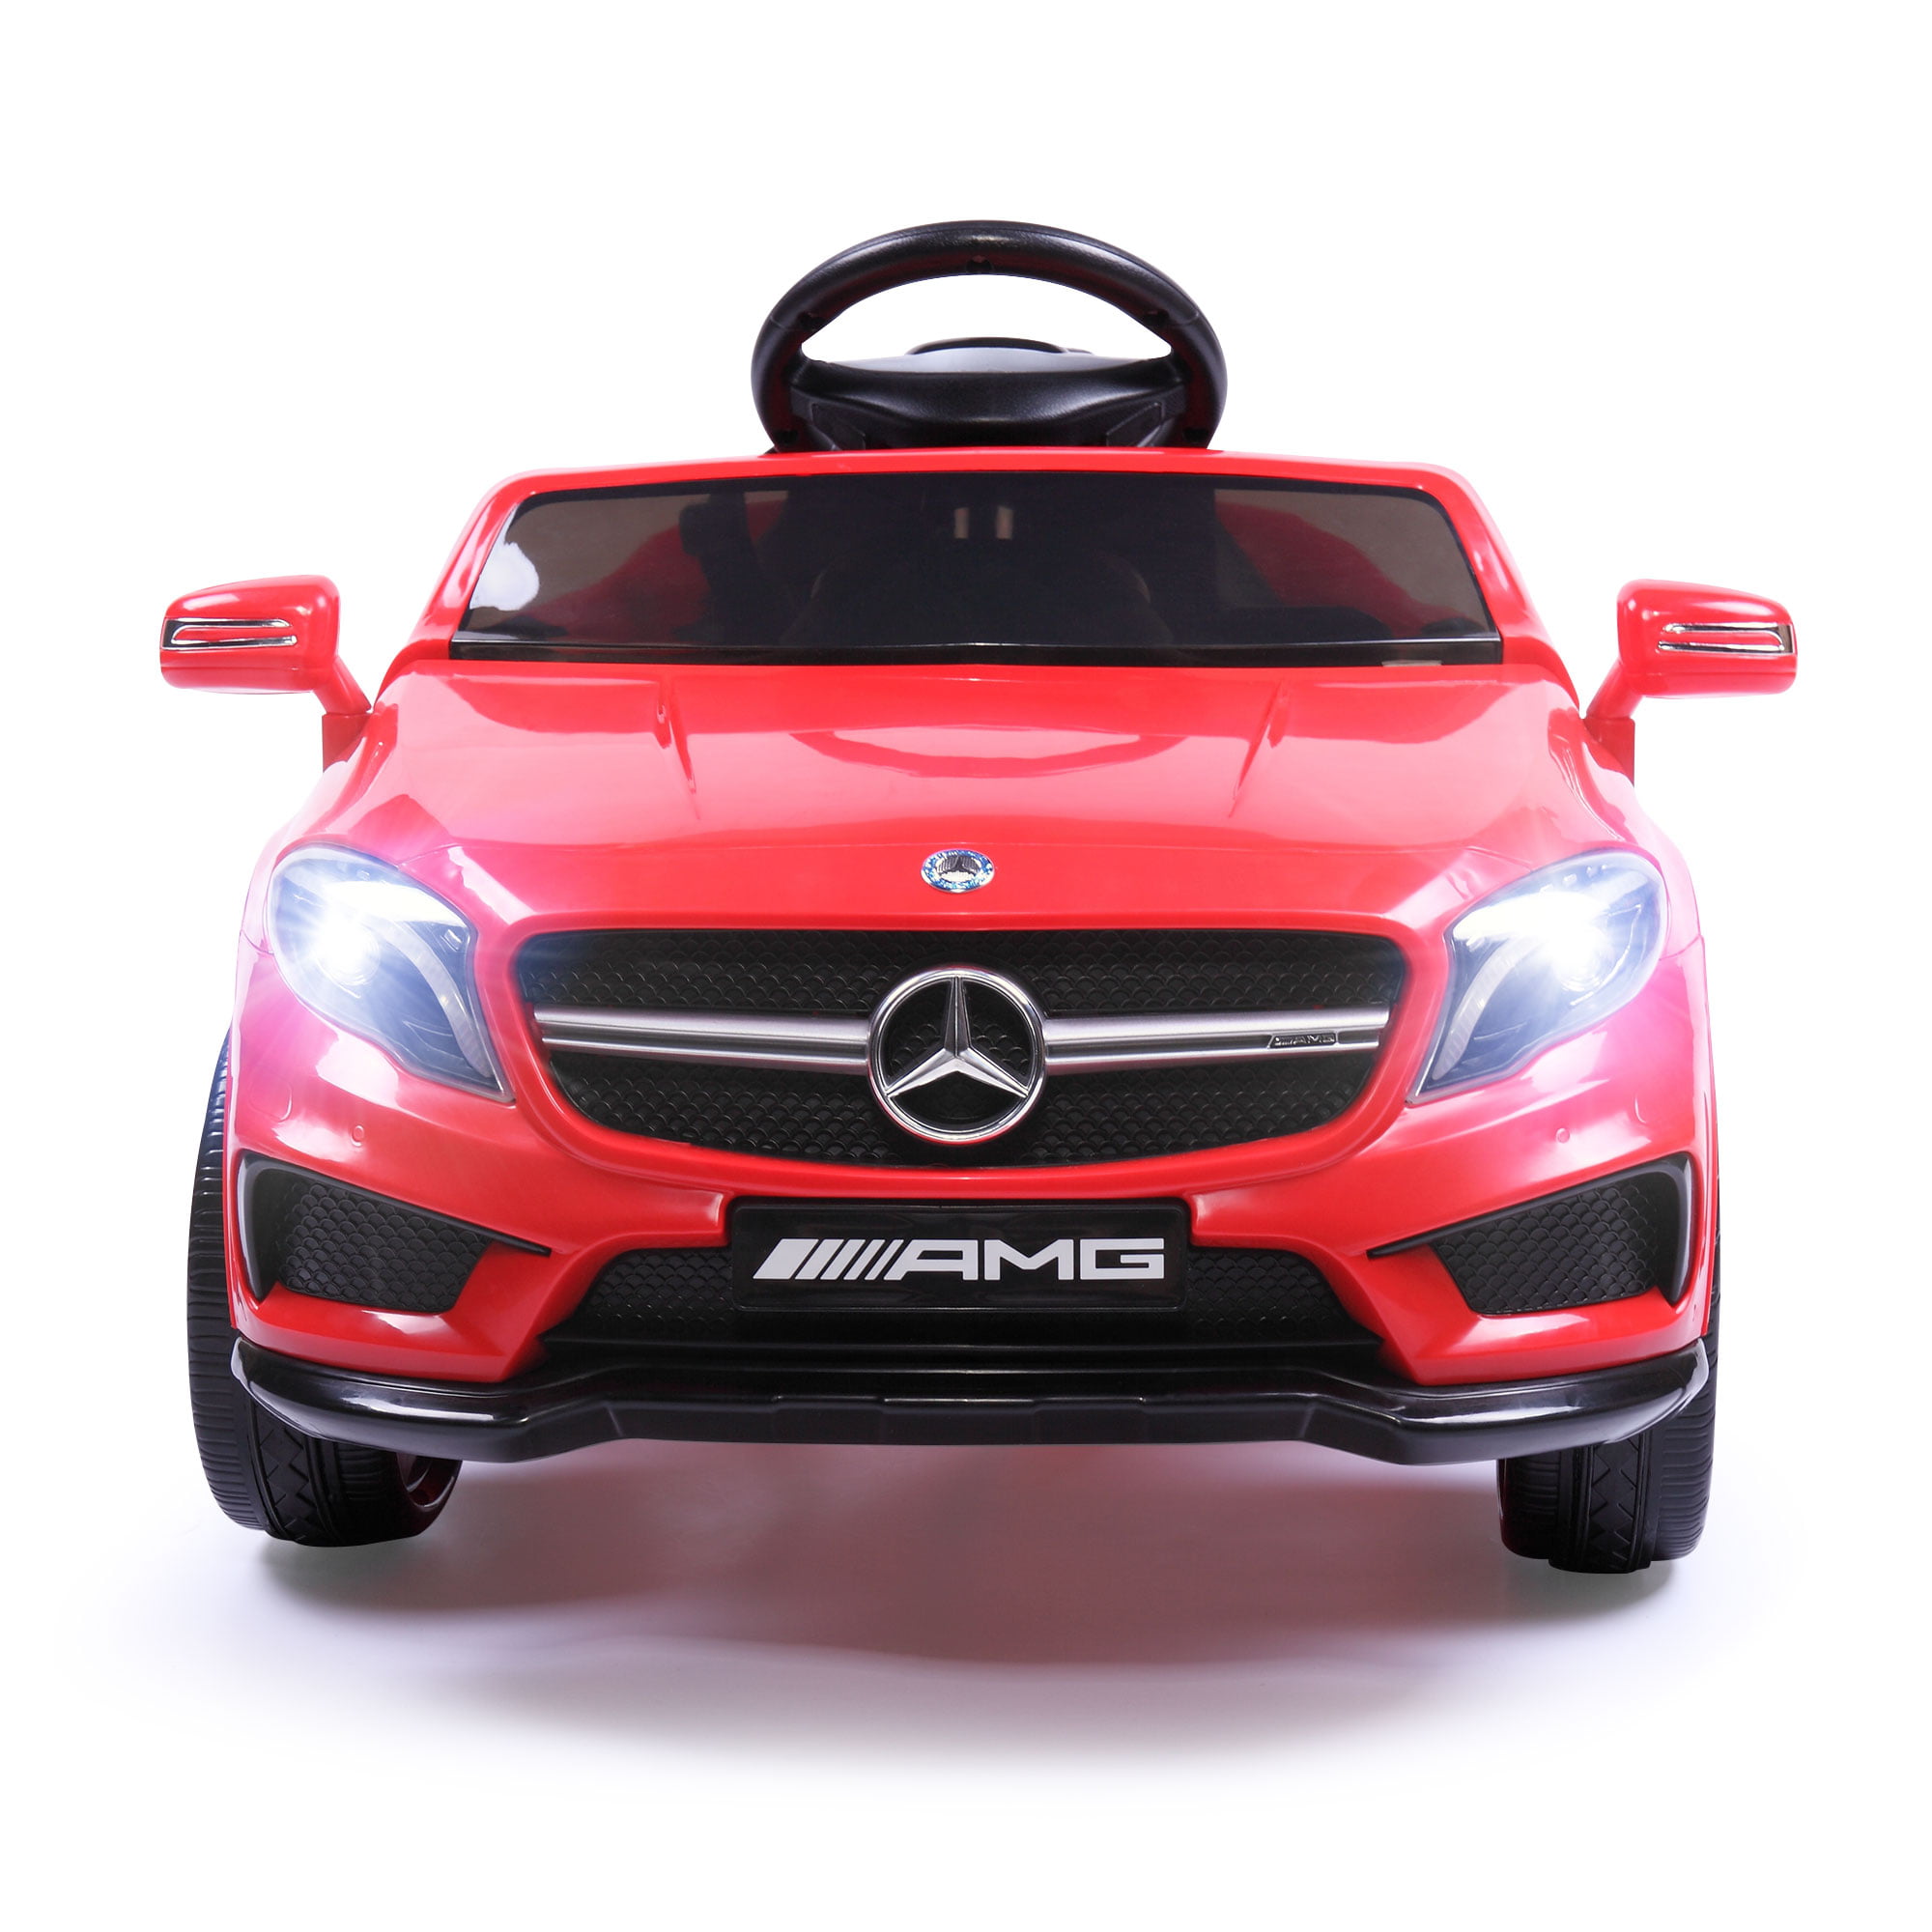 6V Electric Kids Ride on Cars Birthday Gift Present Safe Toy for Boys Girls Red 